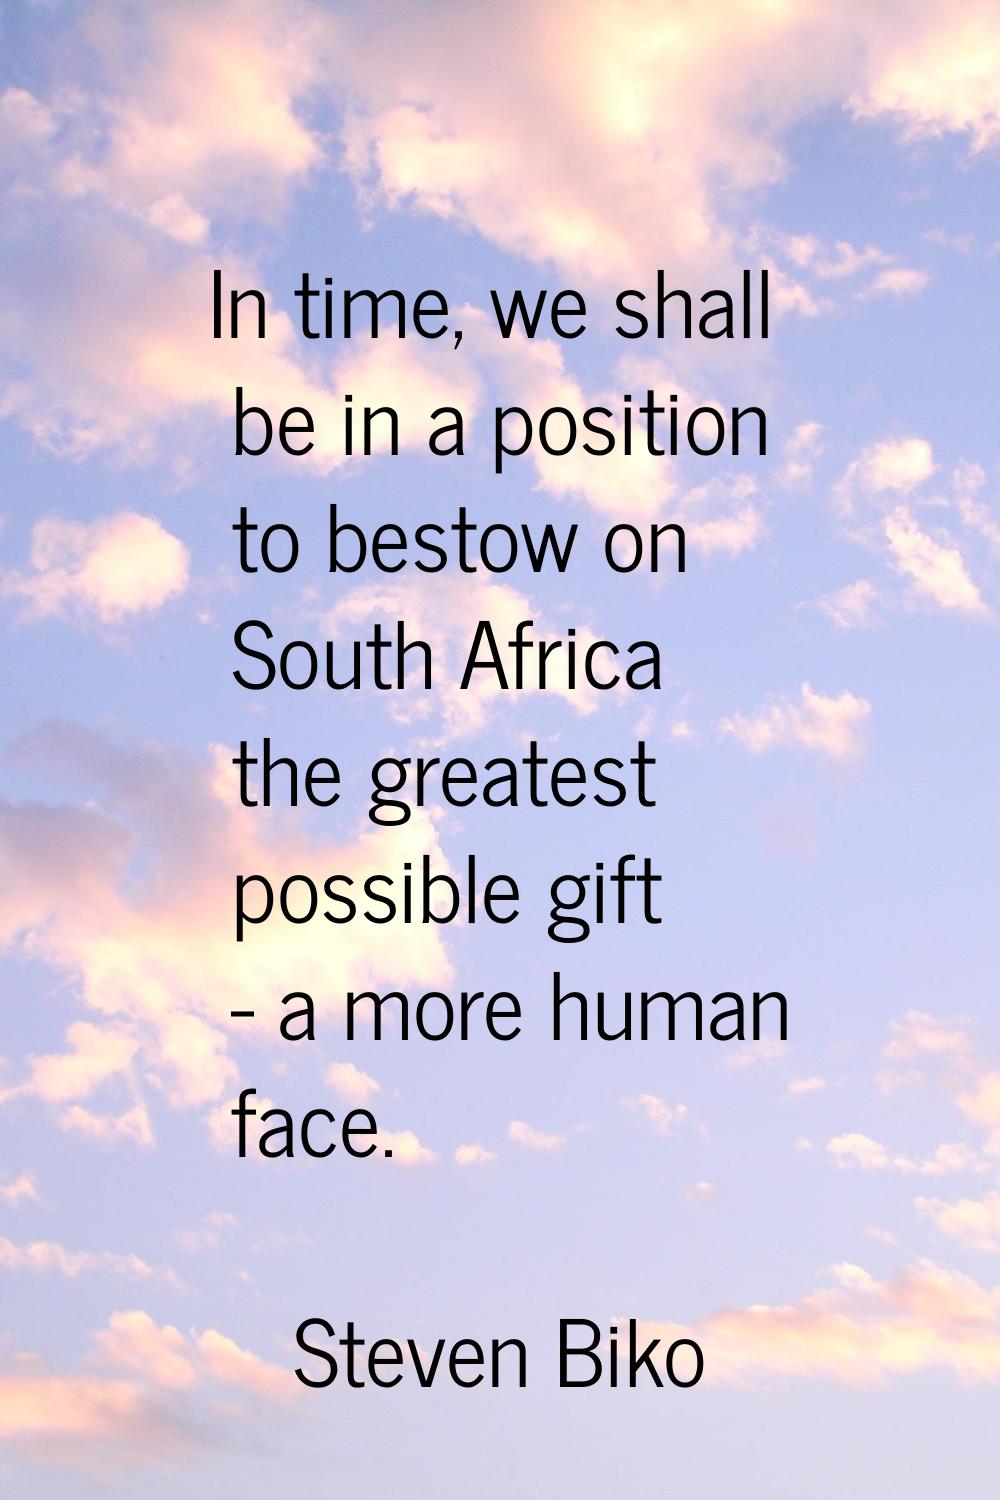 In time, we shall be in a position to bestow on South Africa the greatest possible gift - a more hu